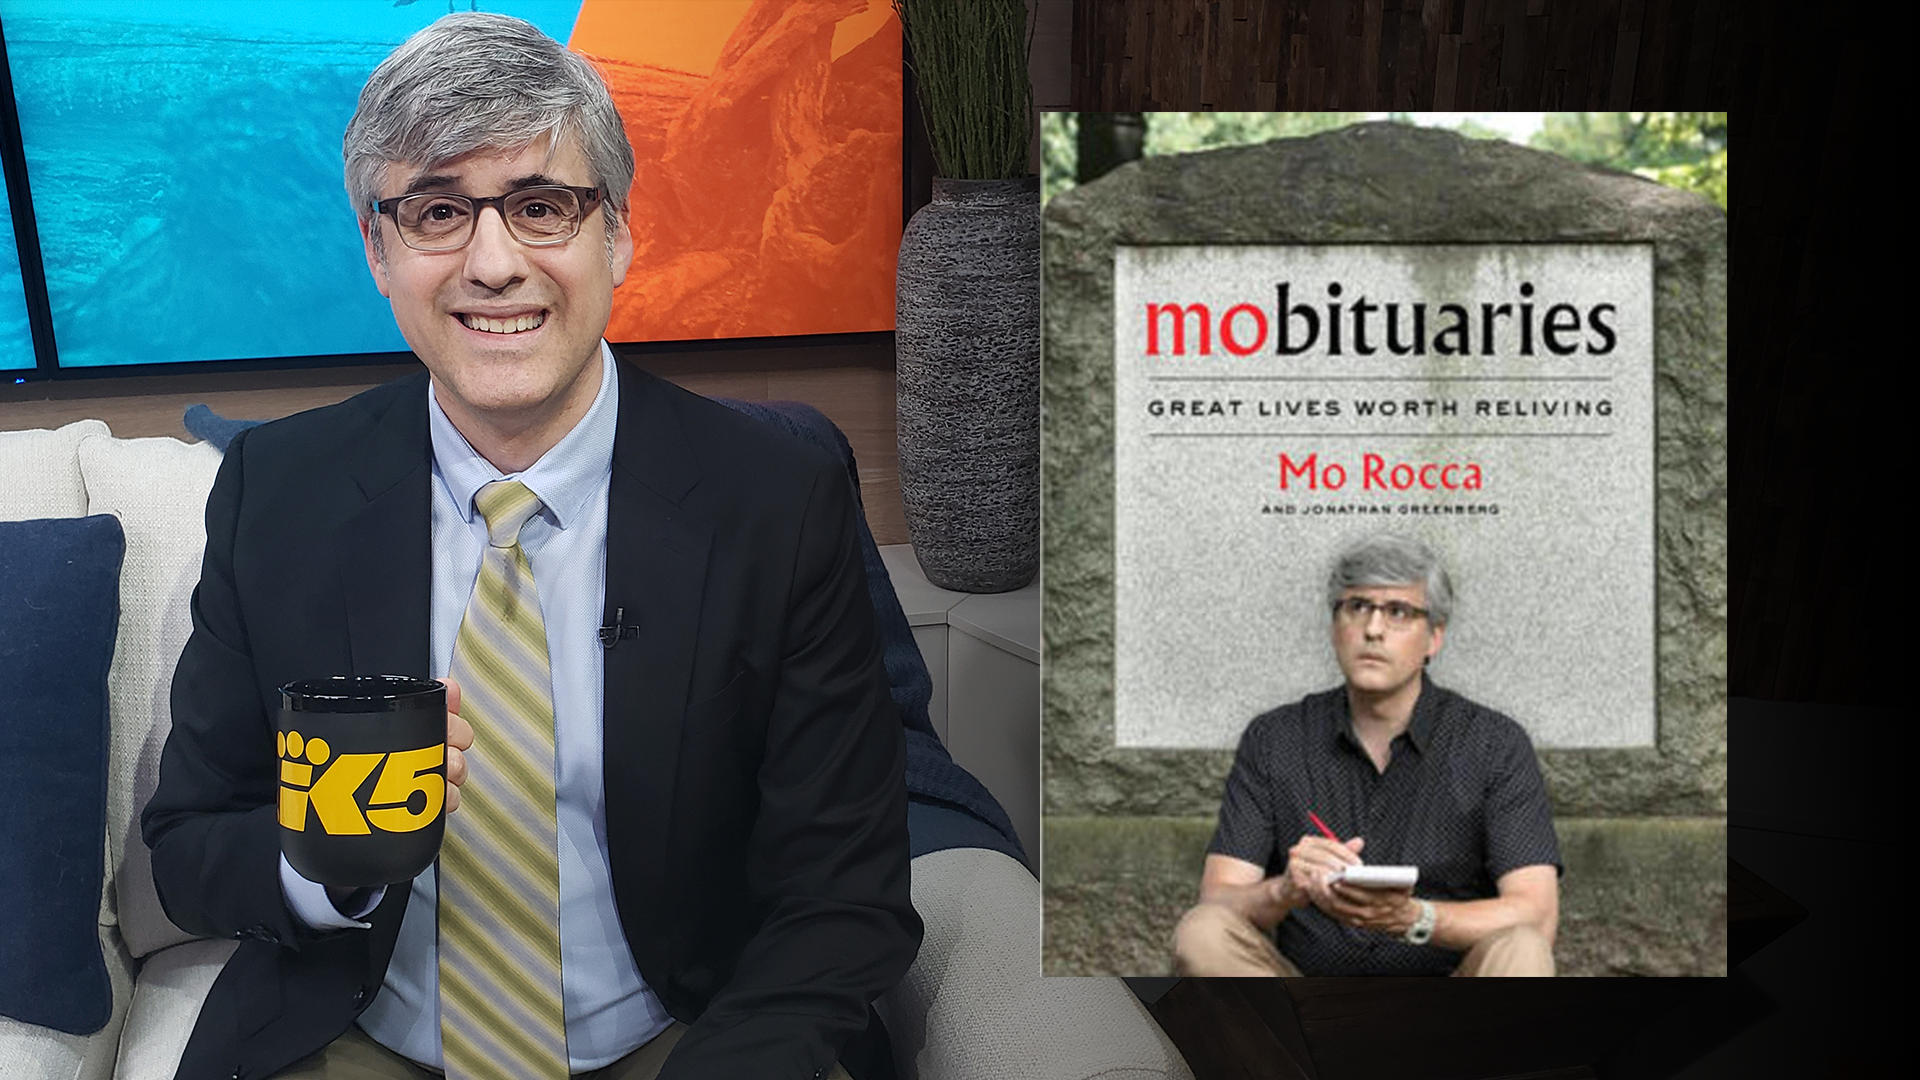 Emmy-award winner, Mo Rocca, sits down to reflect on his new book, Mobituaries, and the inspiration behind it.